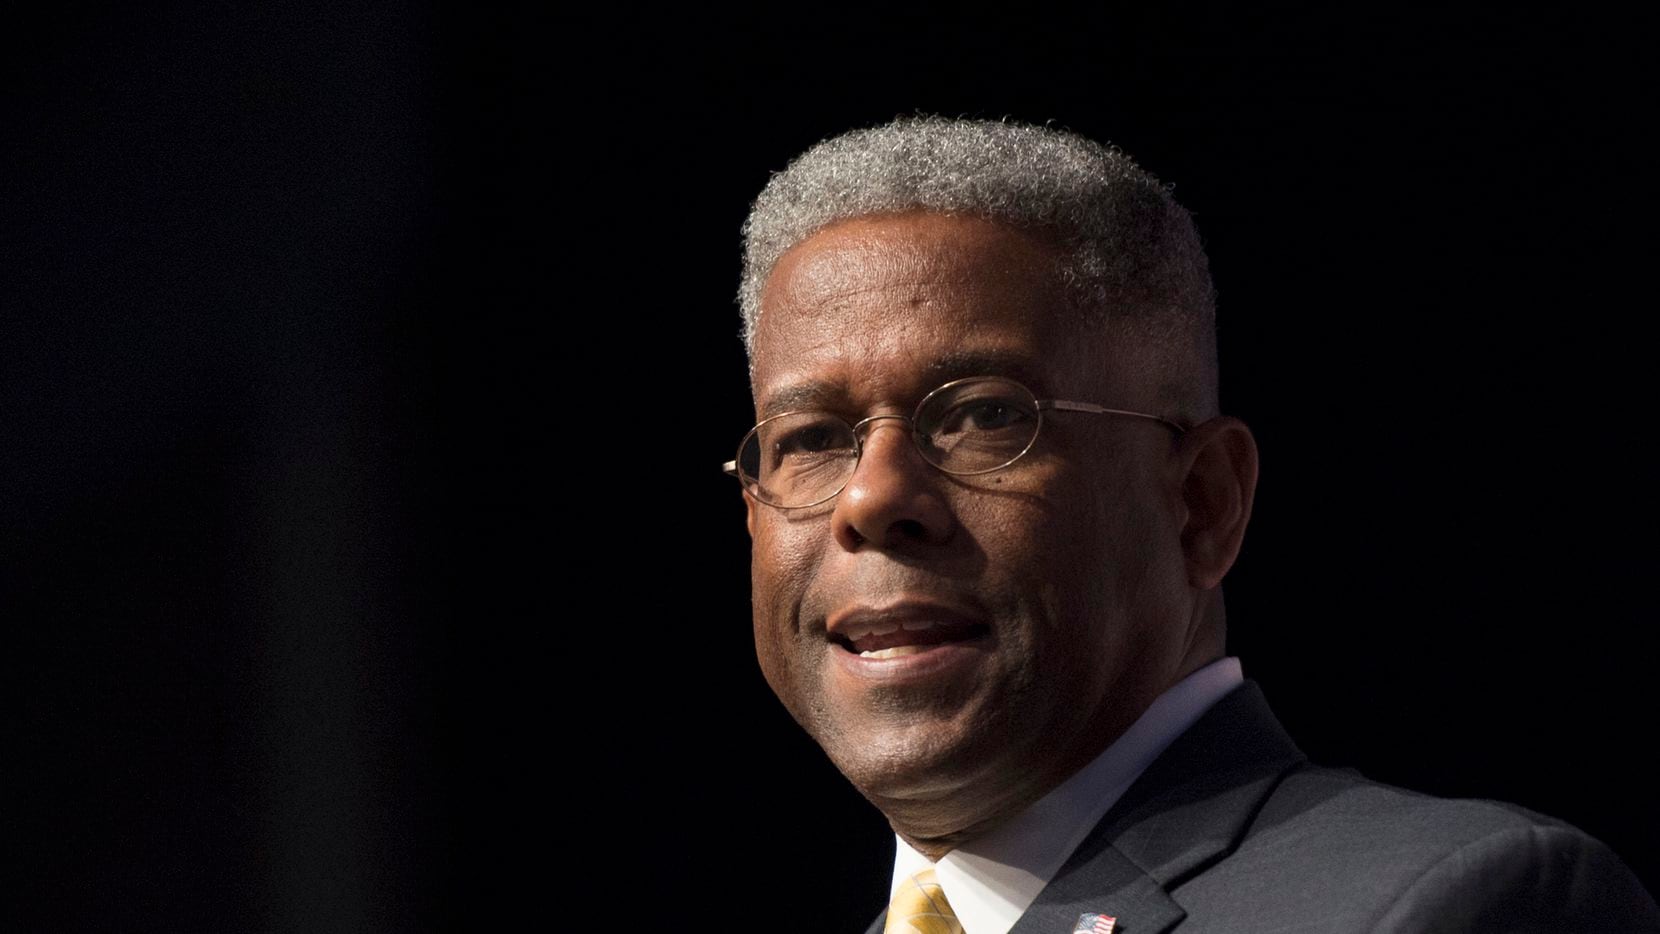 The Grapevine Municipal Court did not immediately respond to a request for comment about the incident involving Republican Texas gubernatorial candidate Allen West (shown).